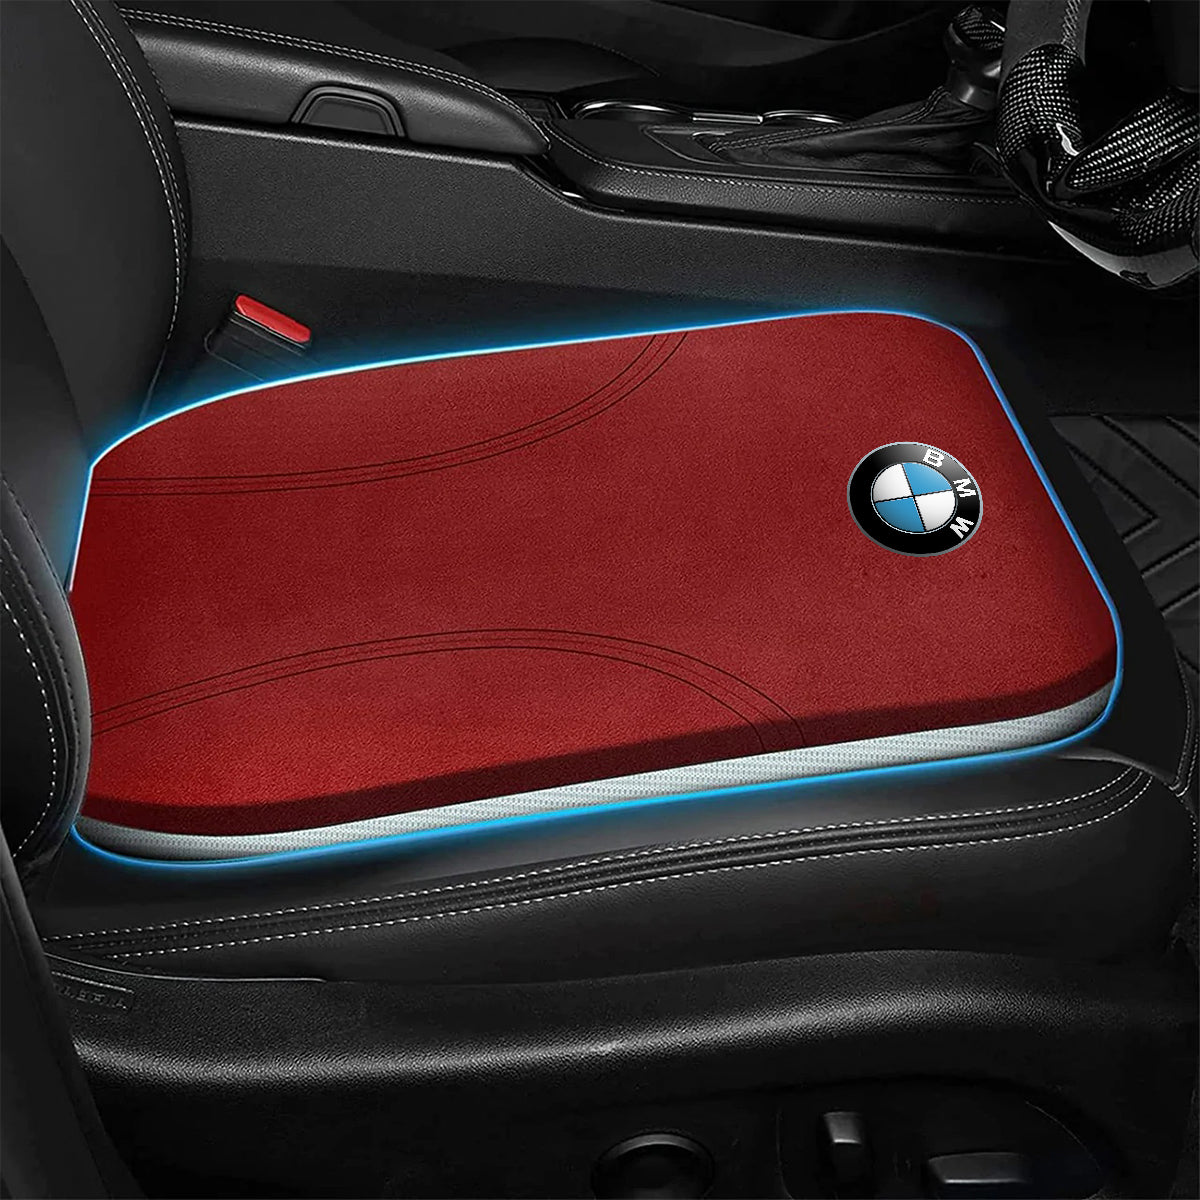 BMW Car Seat Cushion: Enhance Comfort and Support for Your Drive